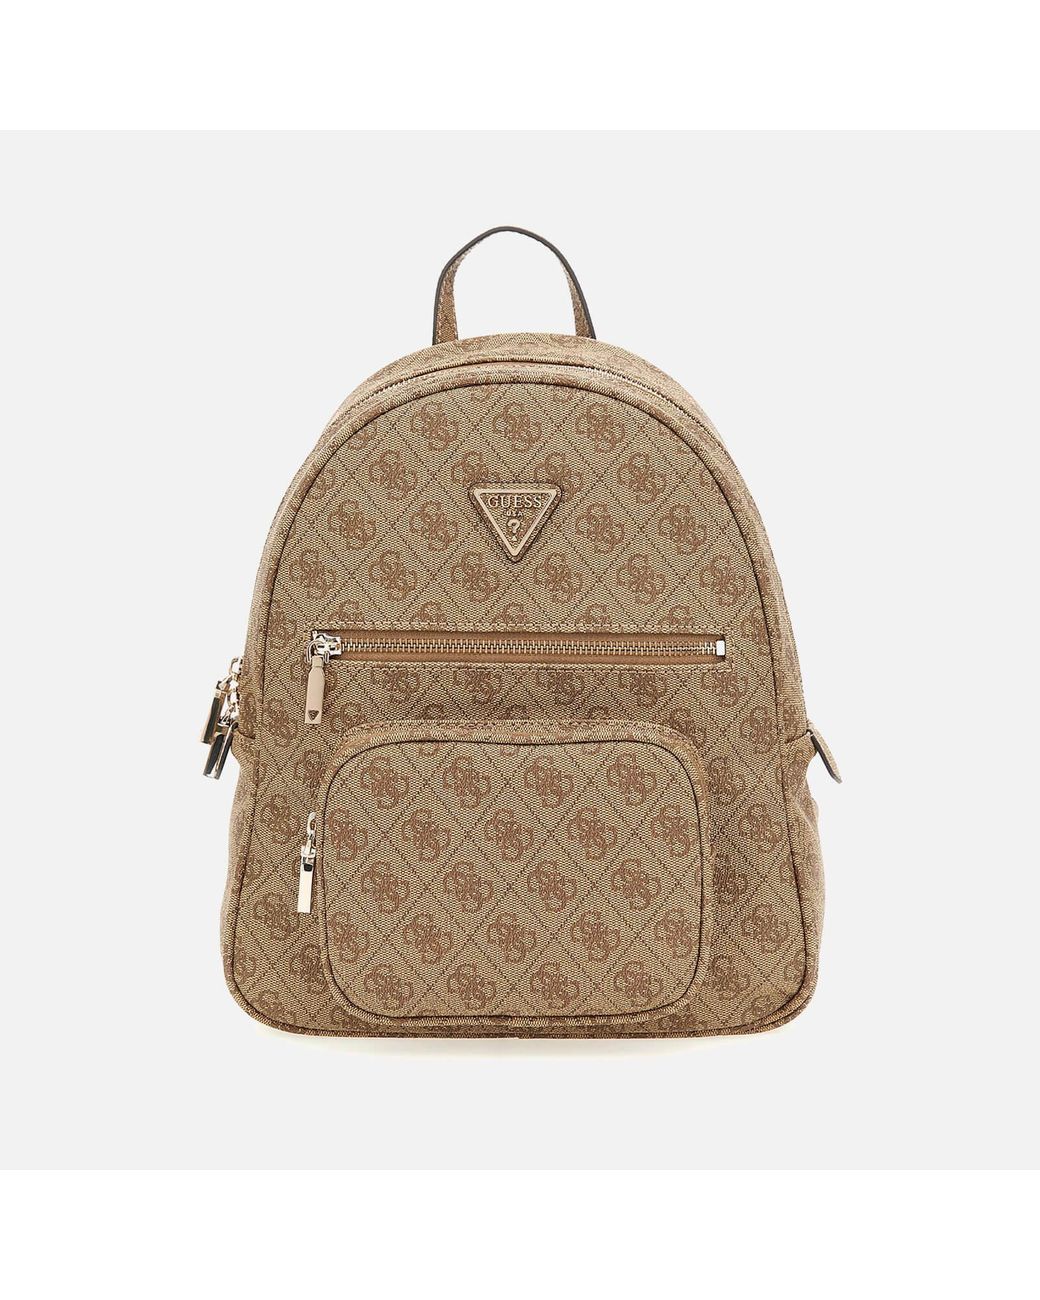 Guess Eco Elements Faux Leather Backpack in Natural | Lyst